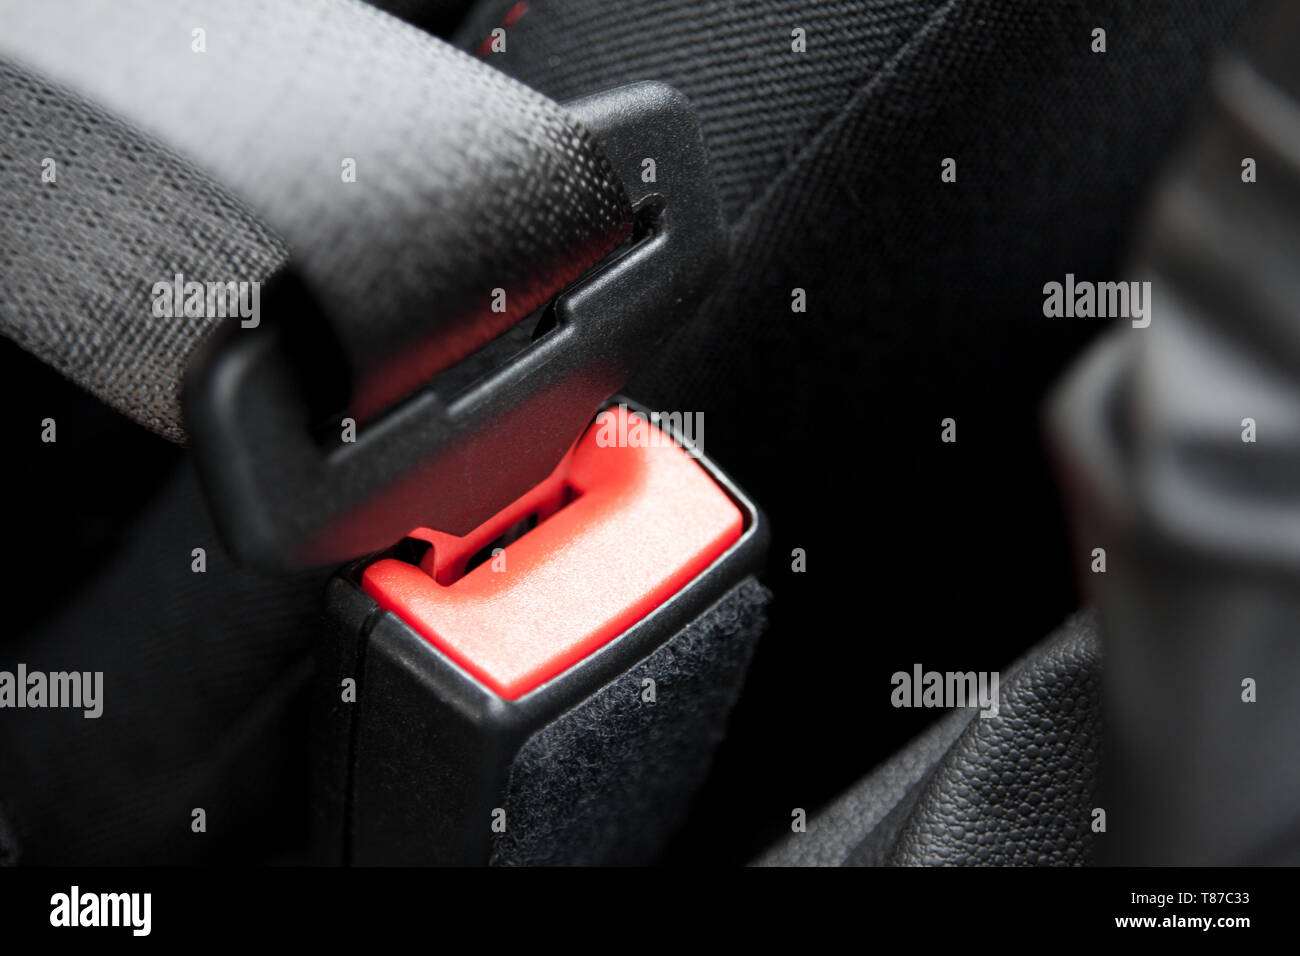 A car seat belt securely fastened for safety. Stock Photo